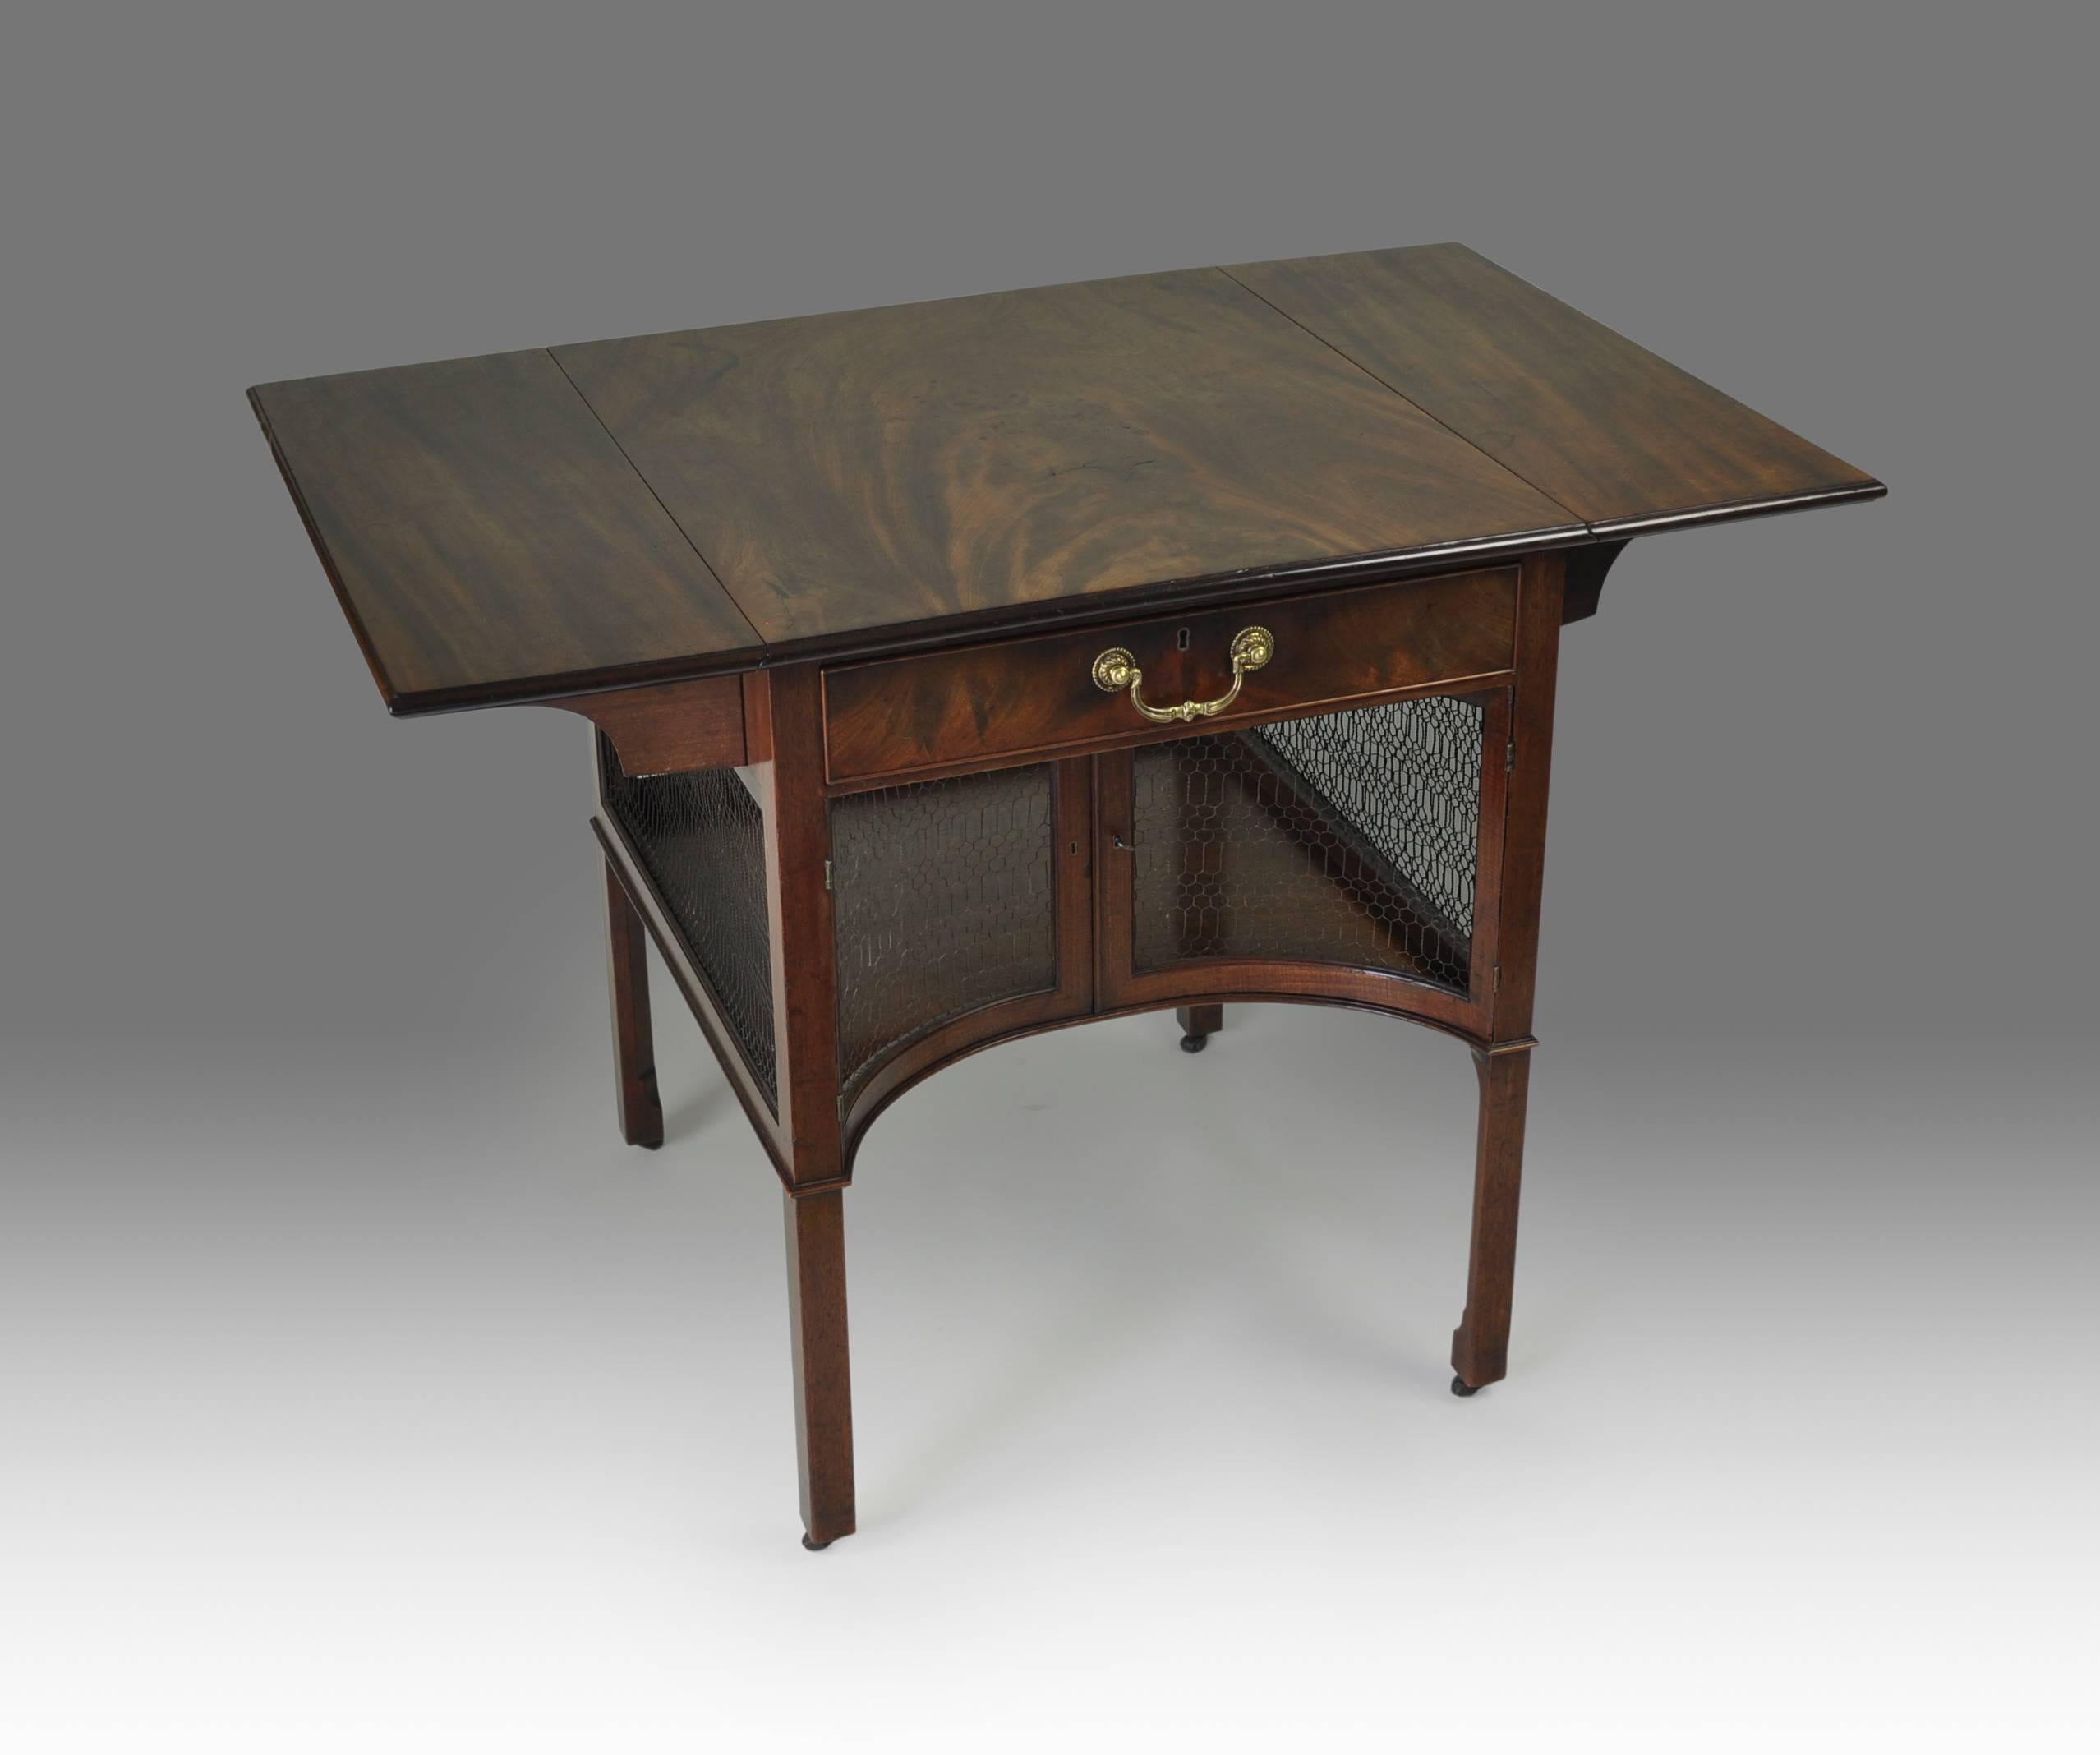 Attributed to Chippendale
An exceptional and rare Chippendale design mahogany breakfast or supper table of the highest quality, the plain top with drop-flaps and moulded edge above a single apron drawer and wire-caged compartment below. Standing on